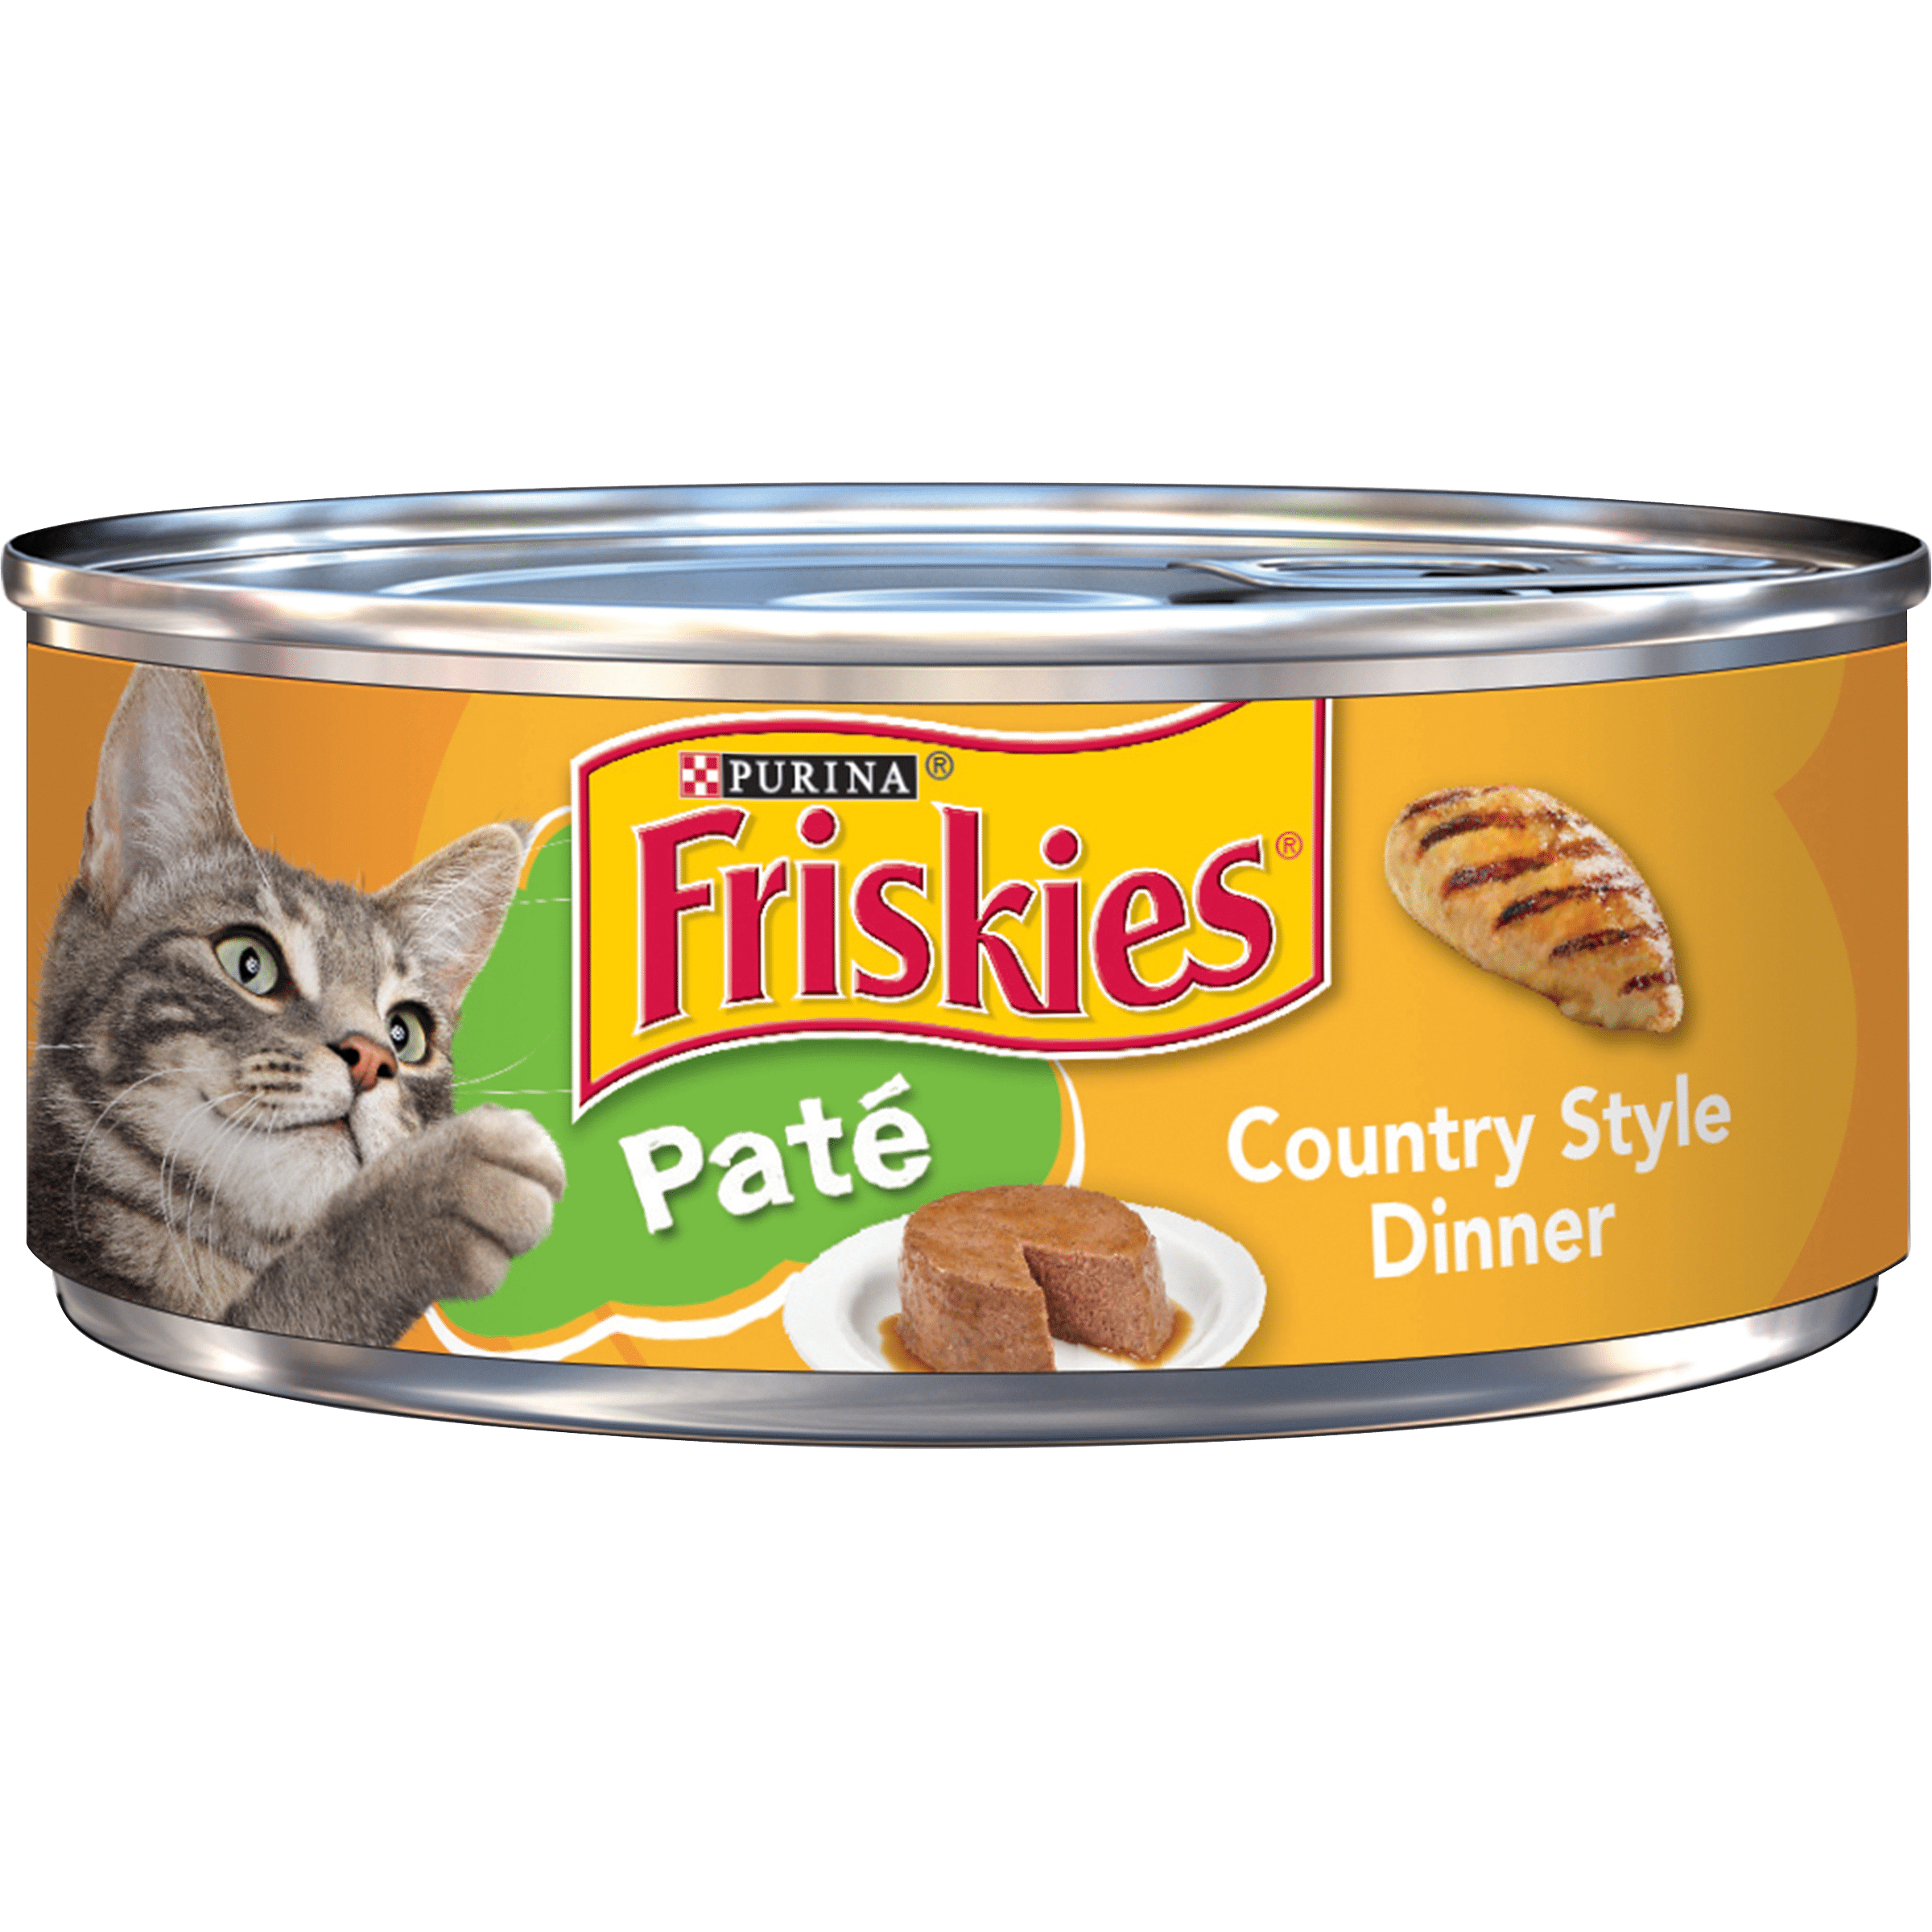 Friskies Pate Wet Cat Food, Country Style Dinner, 5.5 oz. Can Walmart